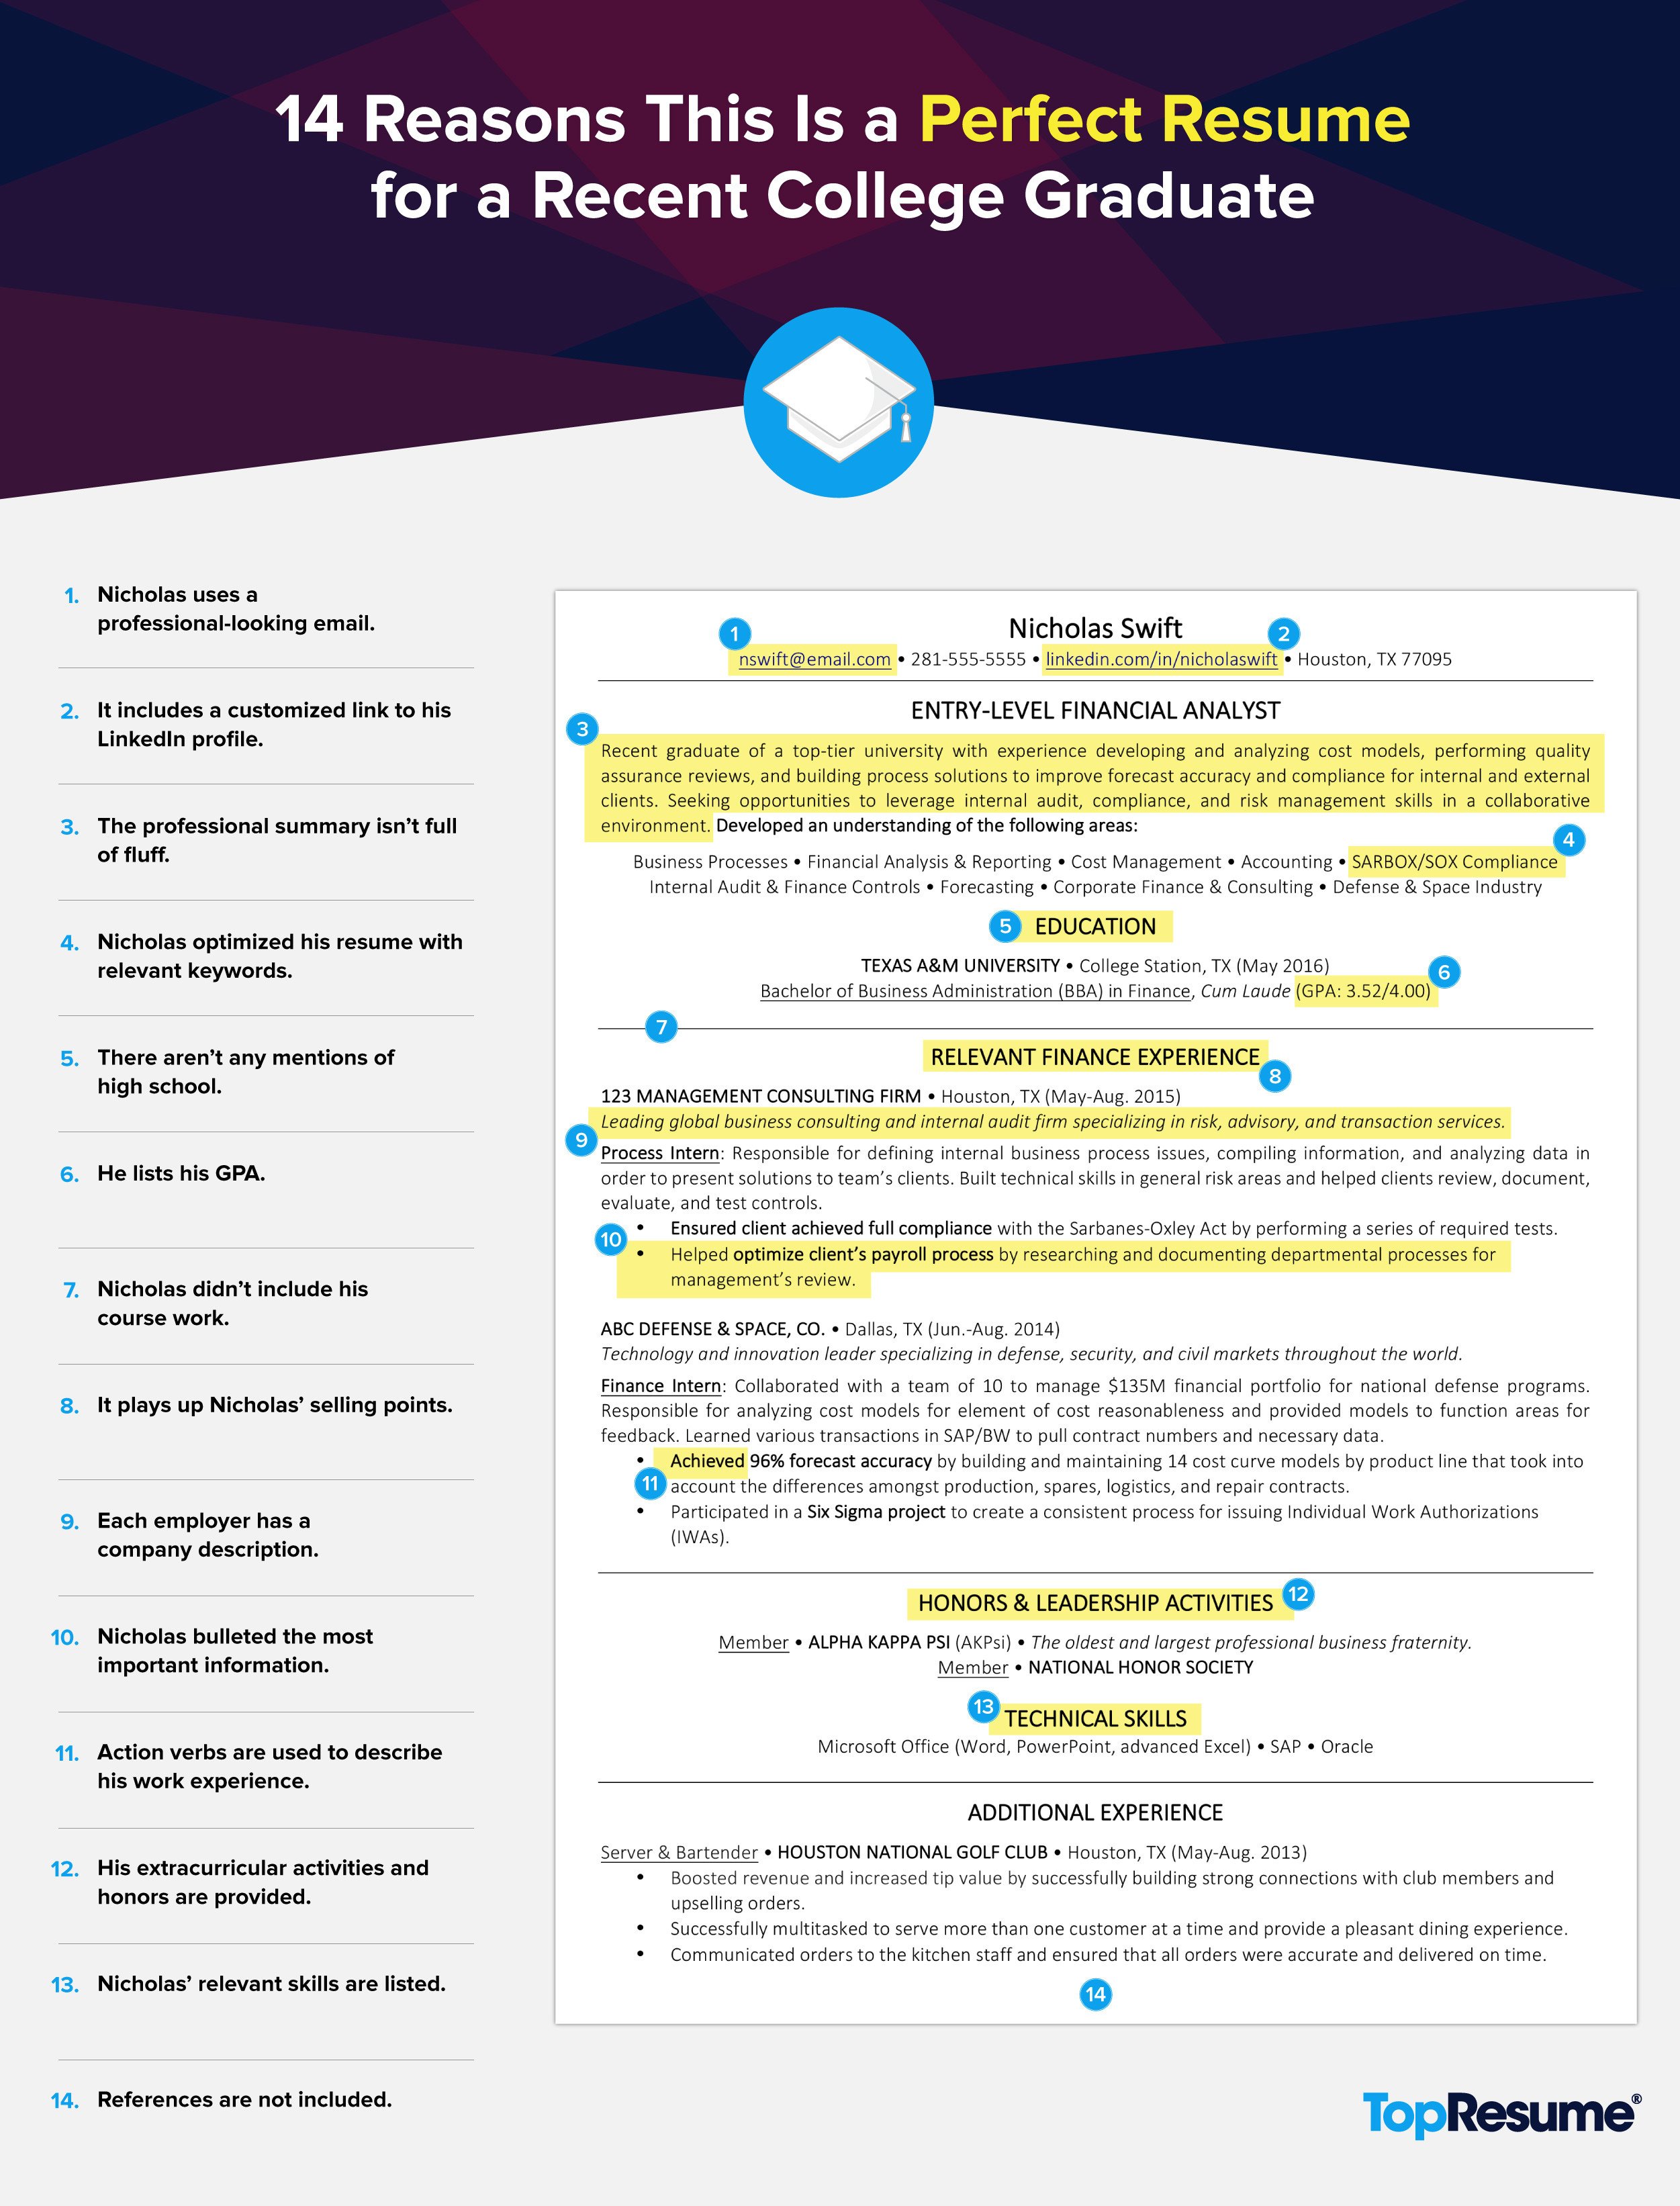 College Grad Resume Templates 14 Reasons This is A Perfect Recent College Graduate